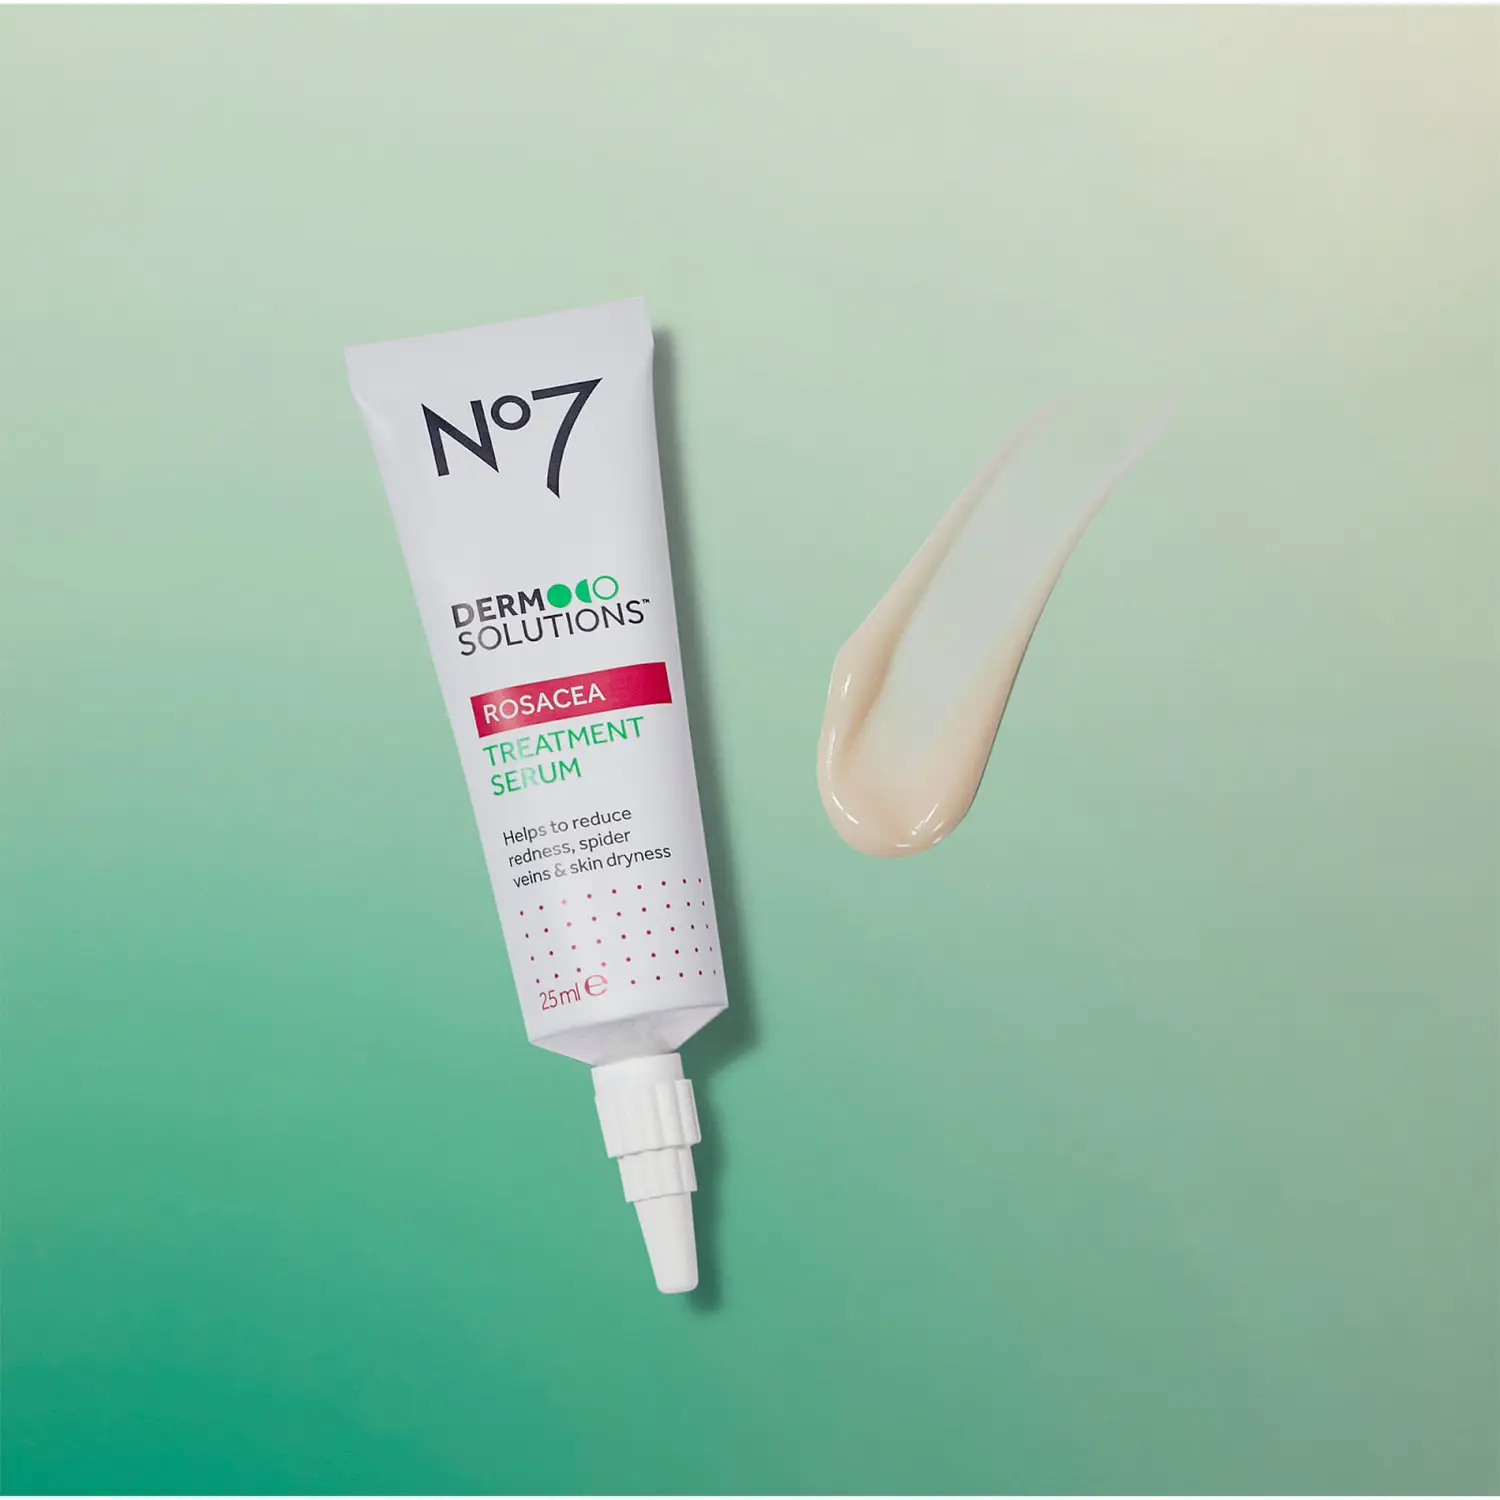 No7 launches new Derm Solutions skincare range for problem skin